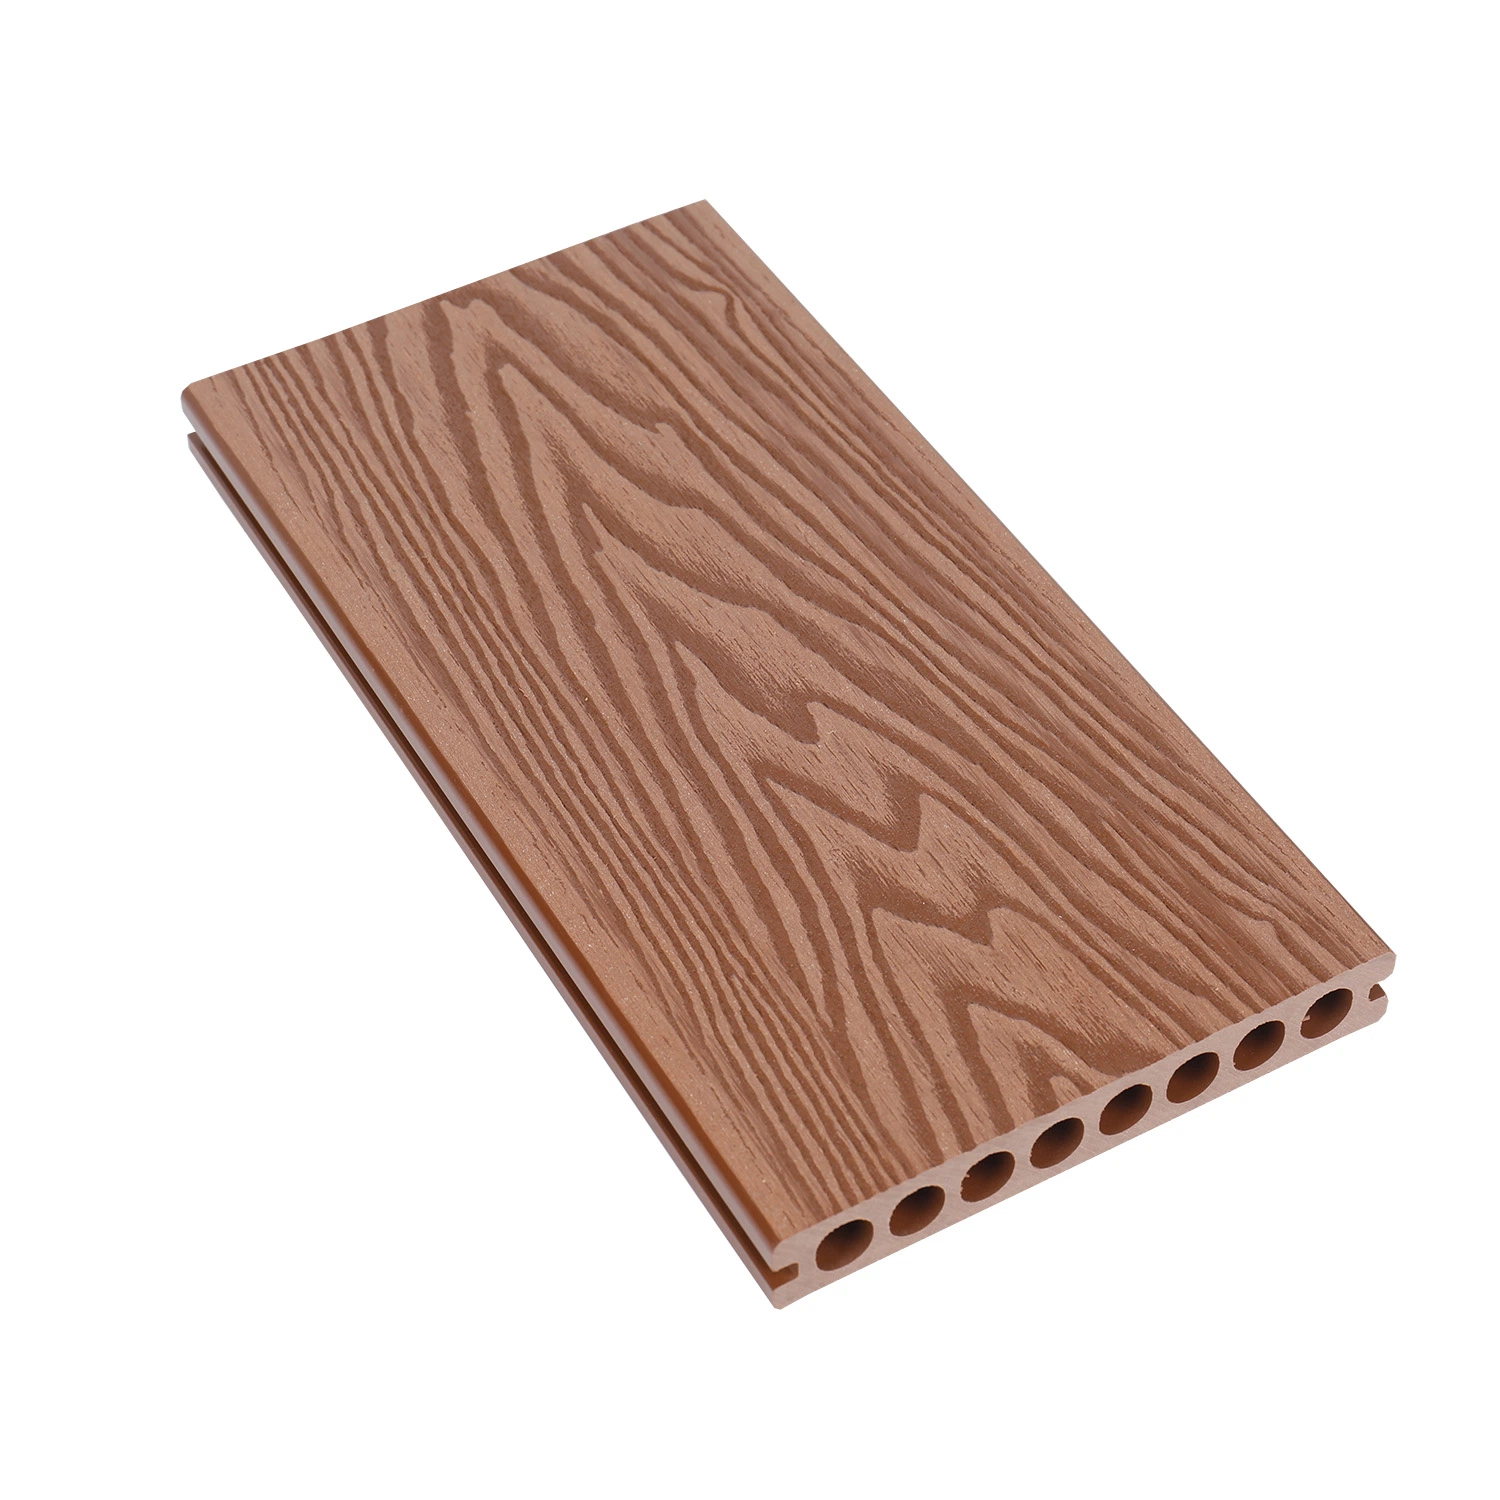 Long-Lasting All-Weather Resistant Luxury Colors Engineered Wood Plastic Composite Material